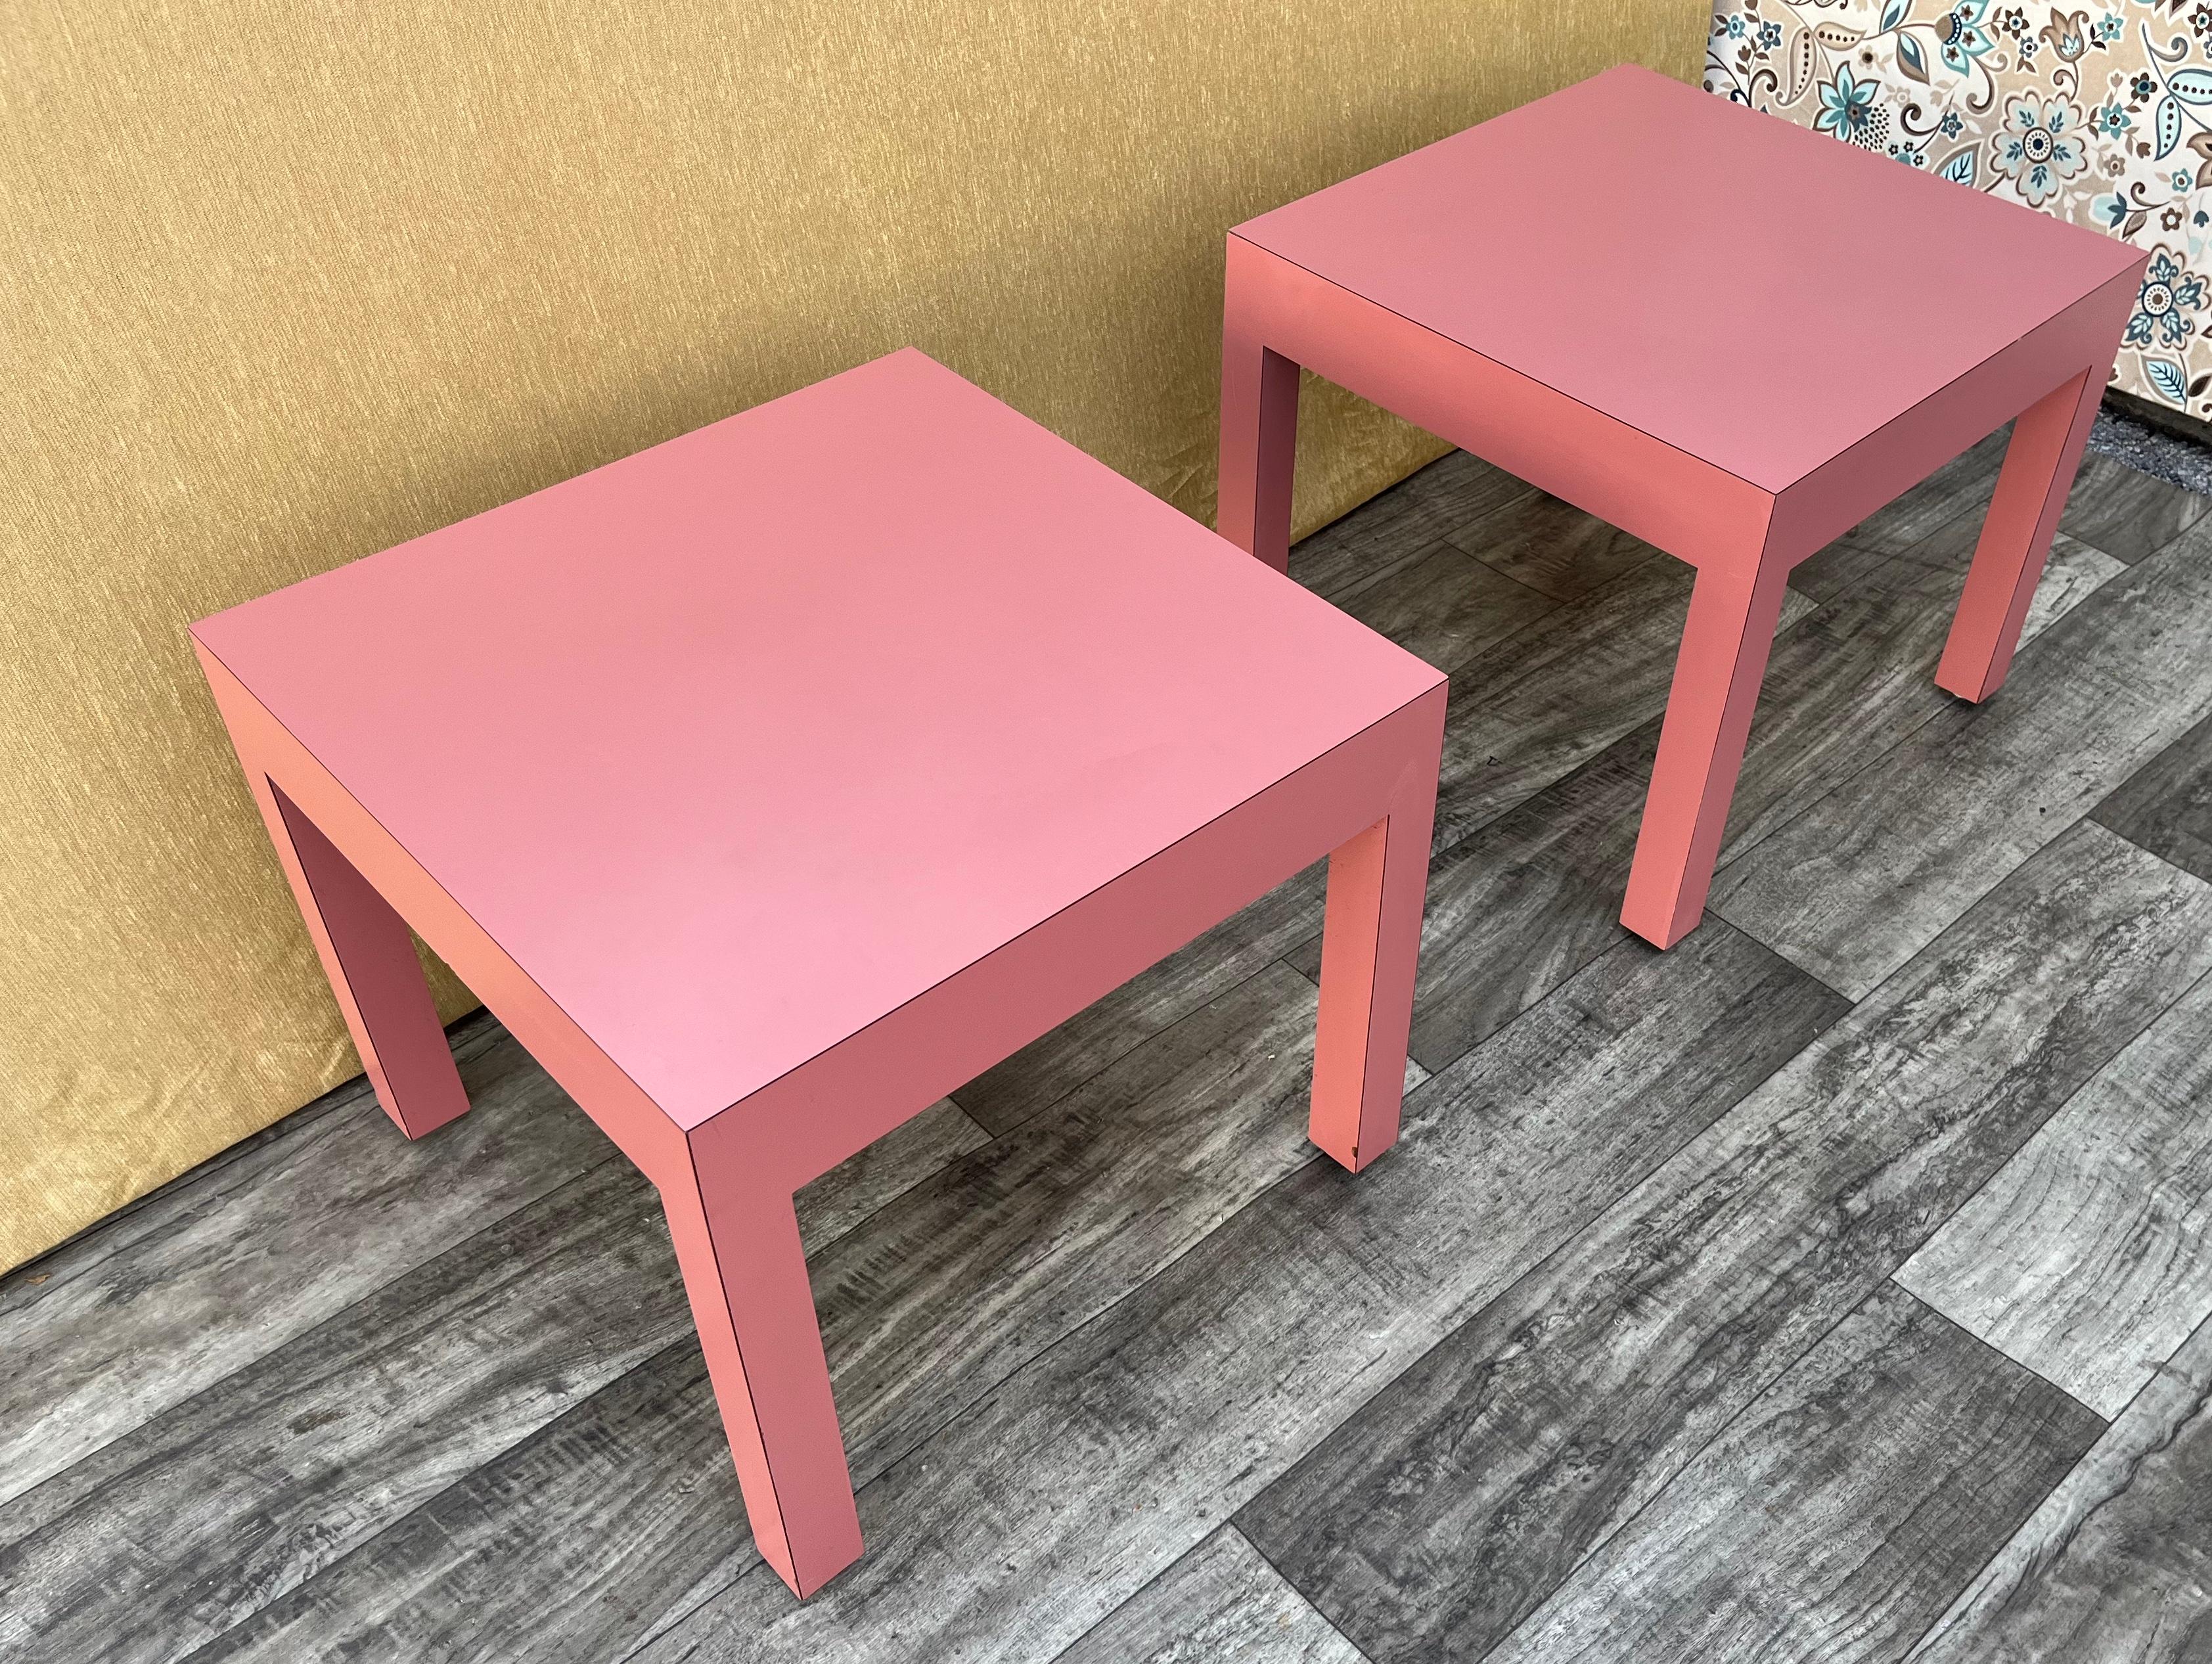 A Pair of Postmodern Pink Laminate Side Tables by Lane Altavista. Circa 1970s
Feature a straight lines design and fully laminated in a mute pink color formica. 
In Good Vintage Condition with signs of wear consistent with age and history. There are